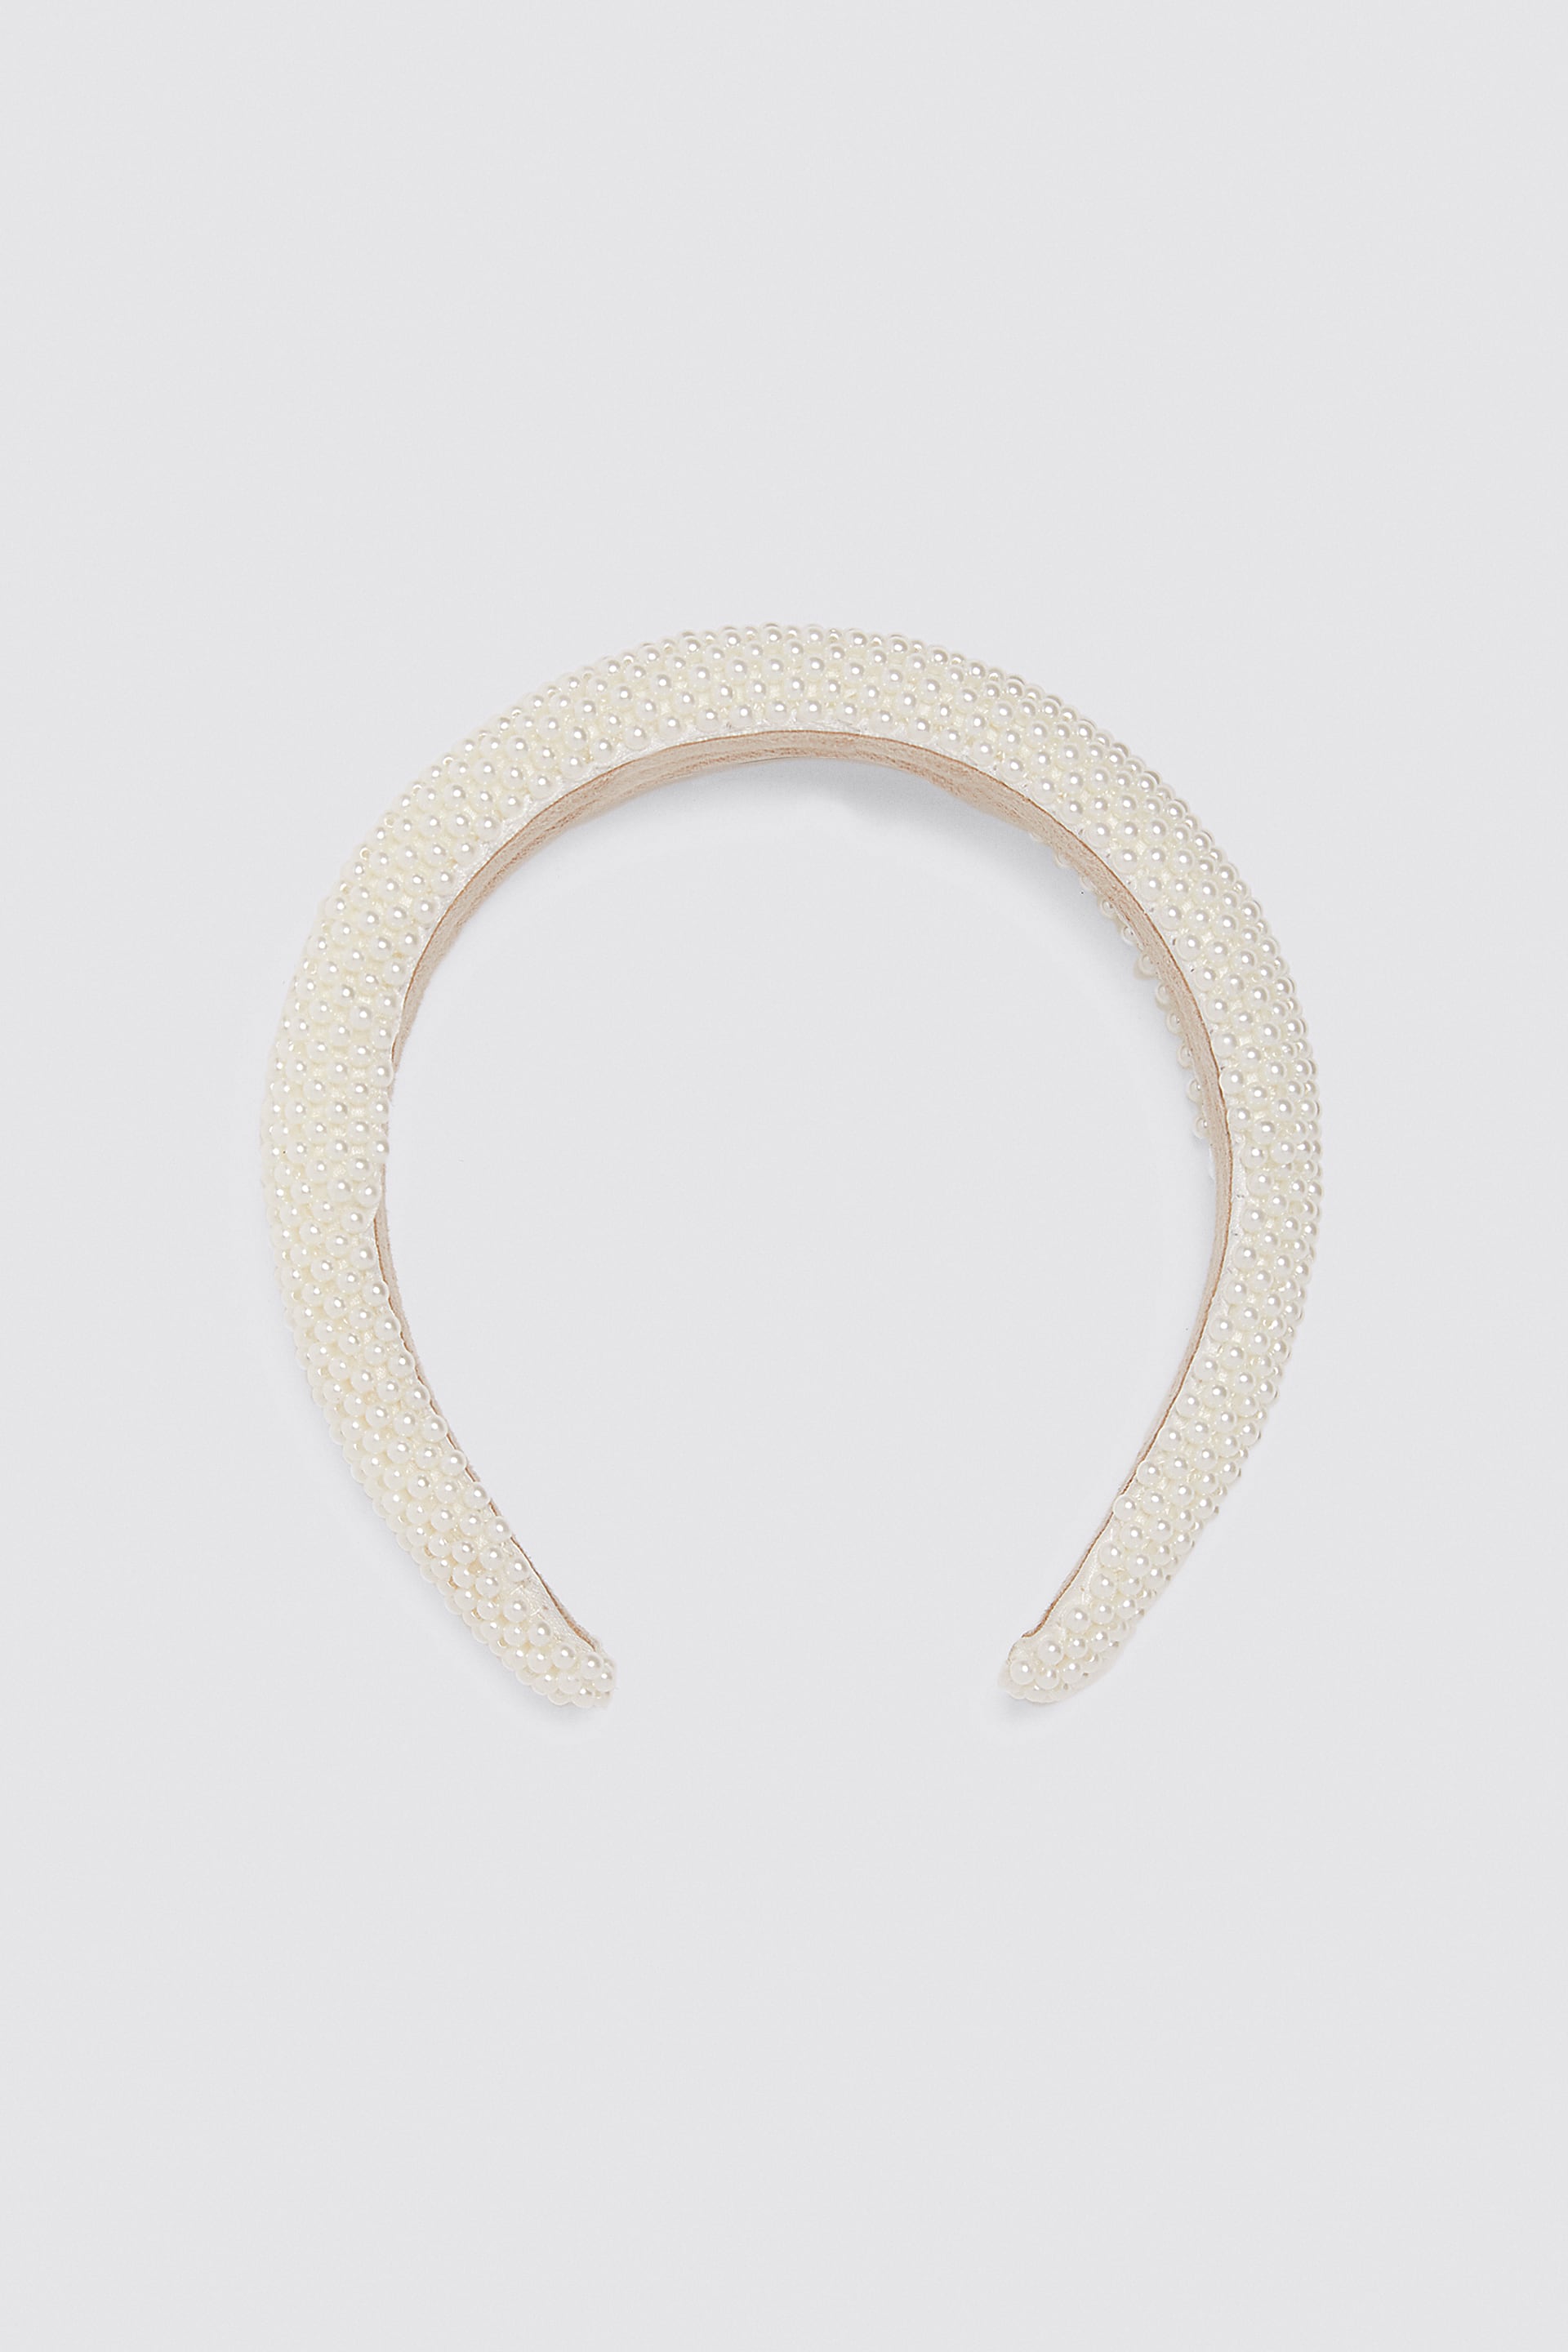 Quilted pearl headband